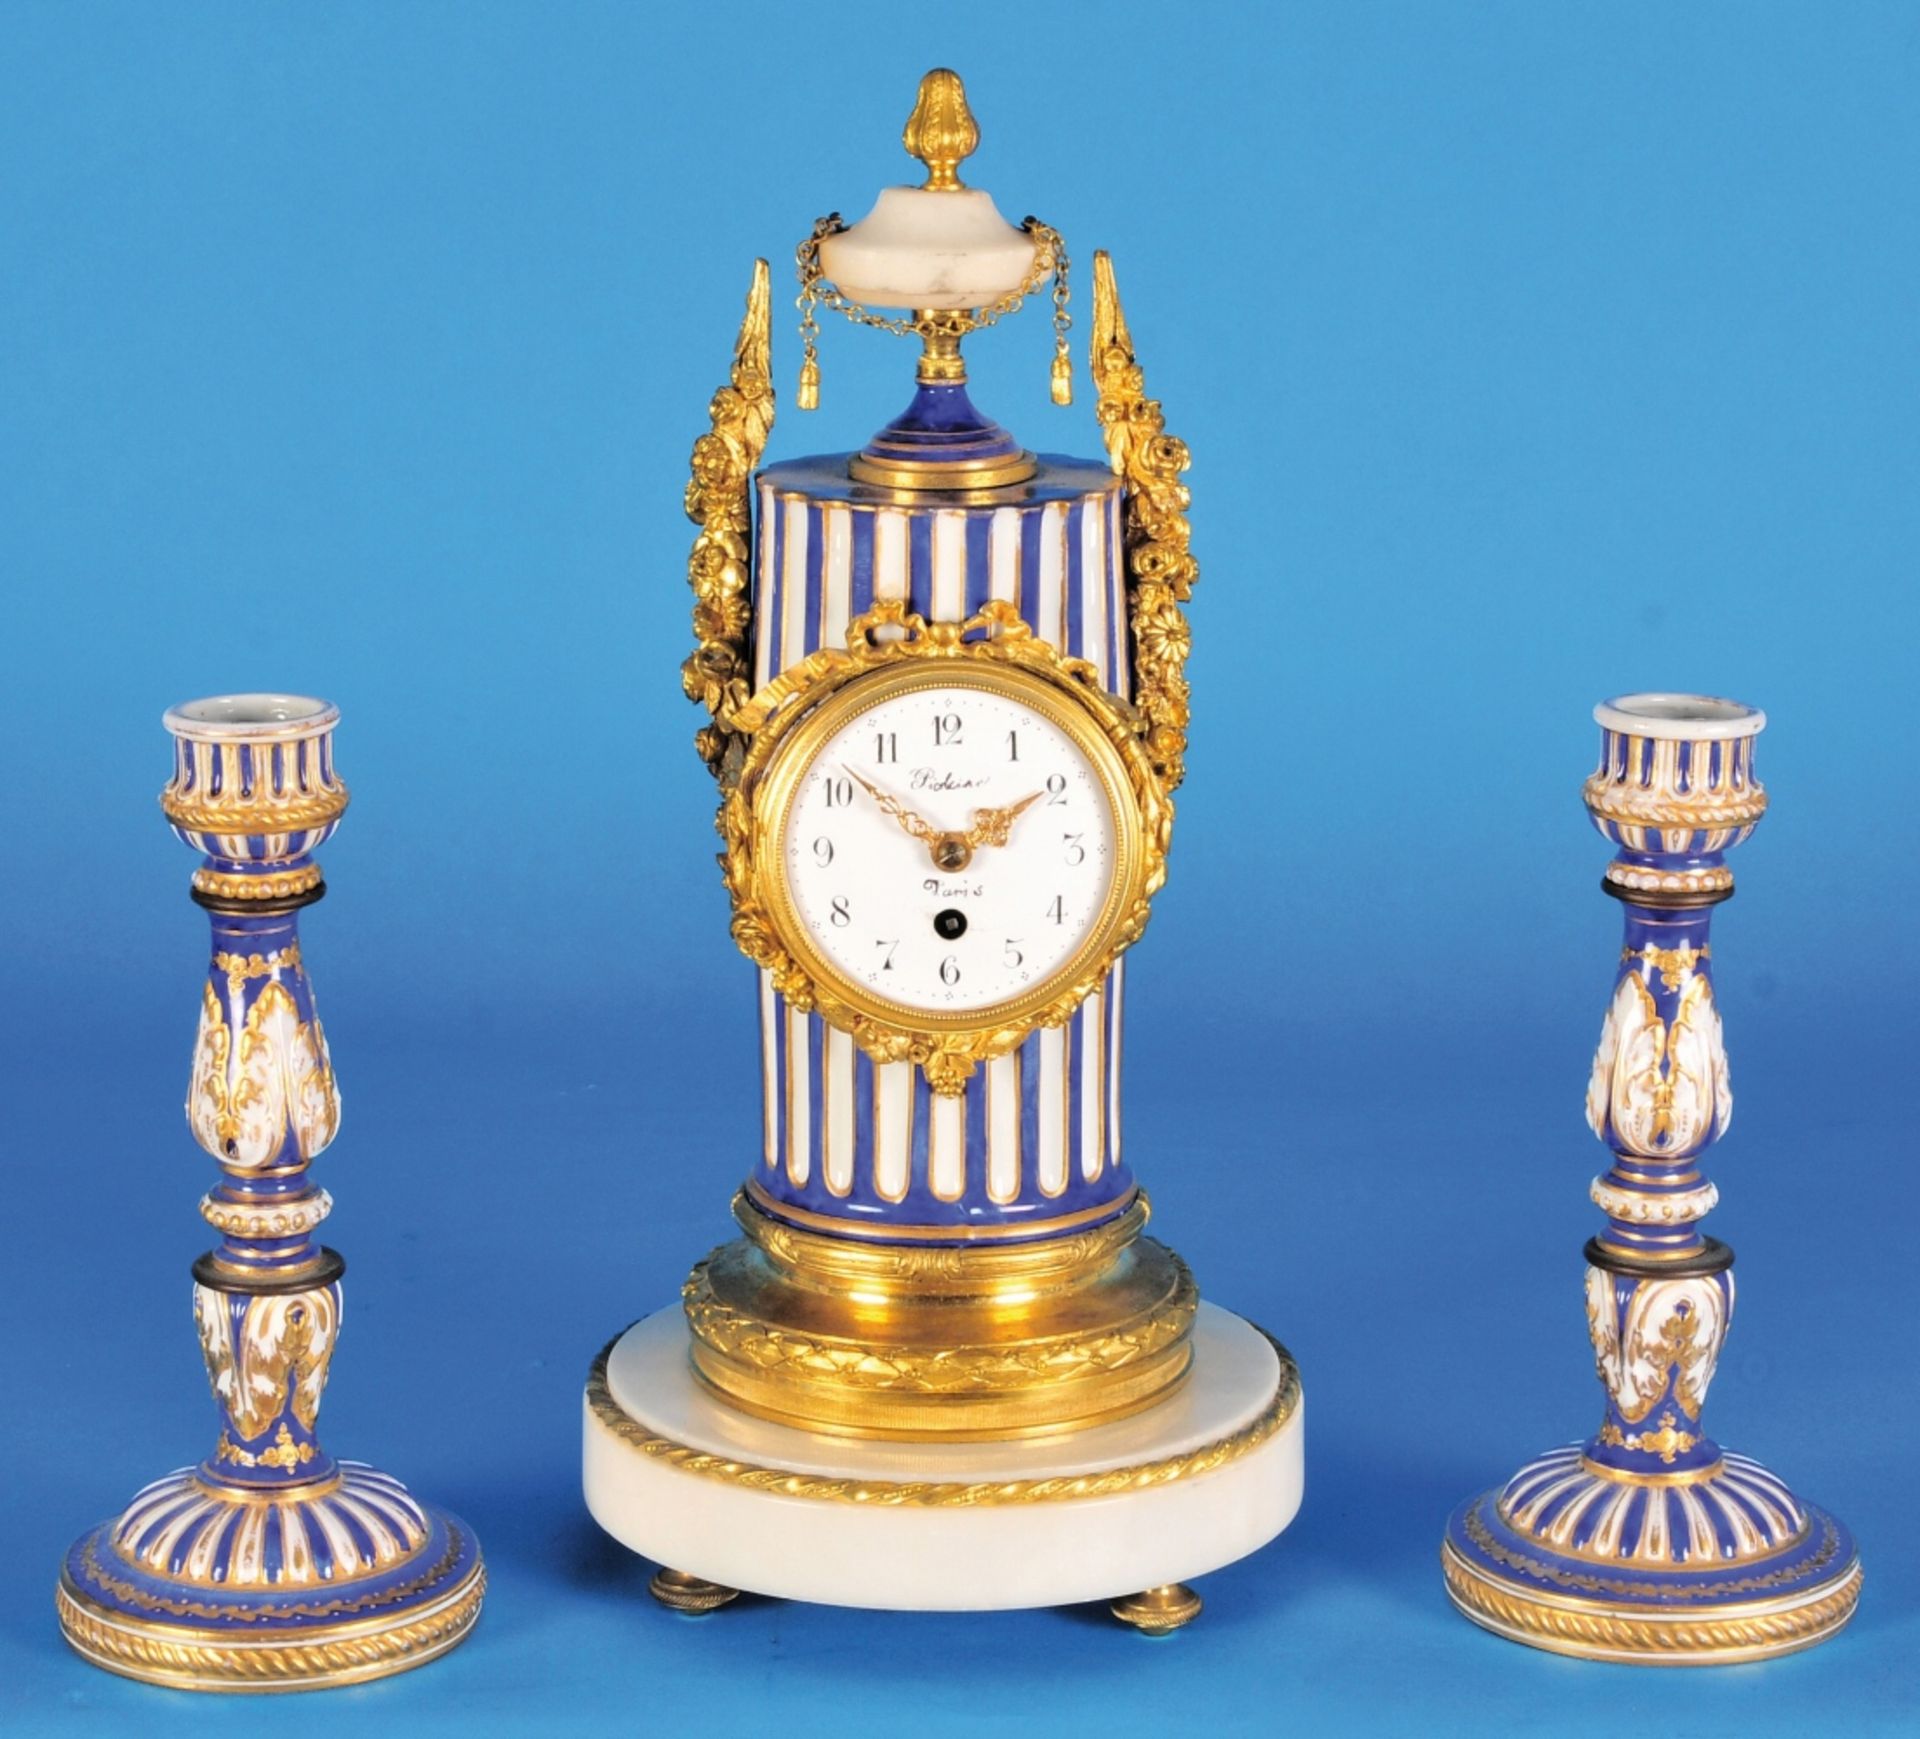 French porcelain clock set in the shape of a Column with two porcelain candlesticks